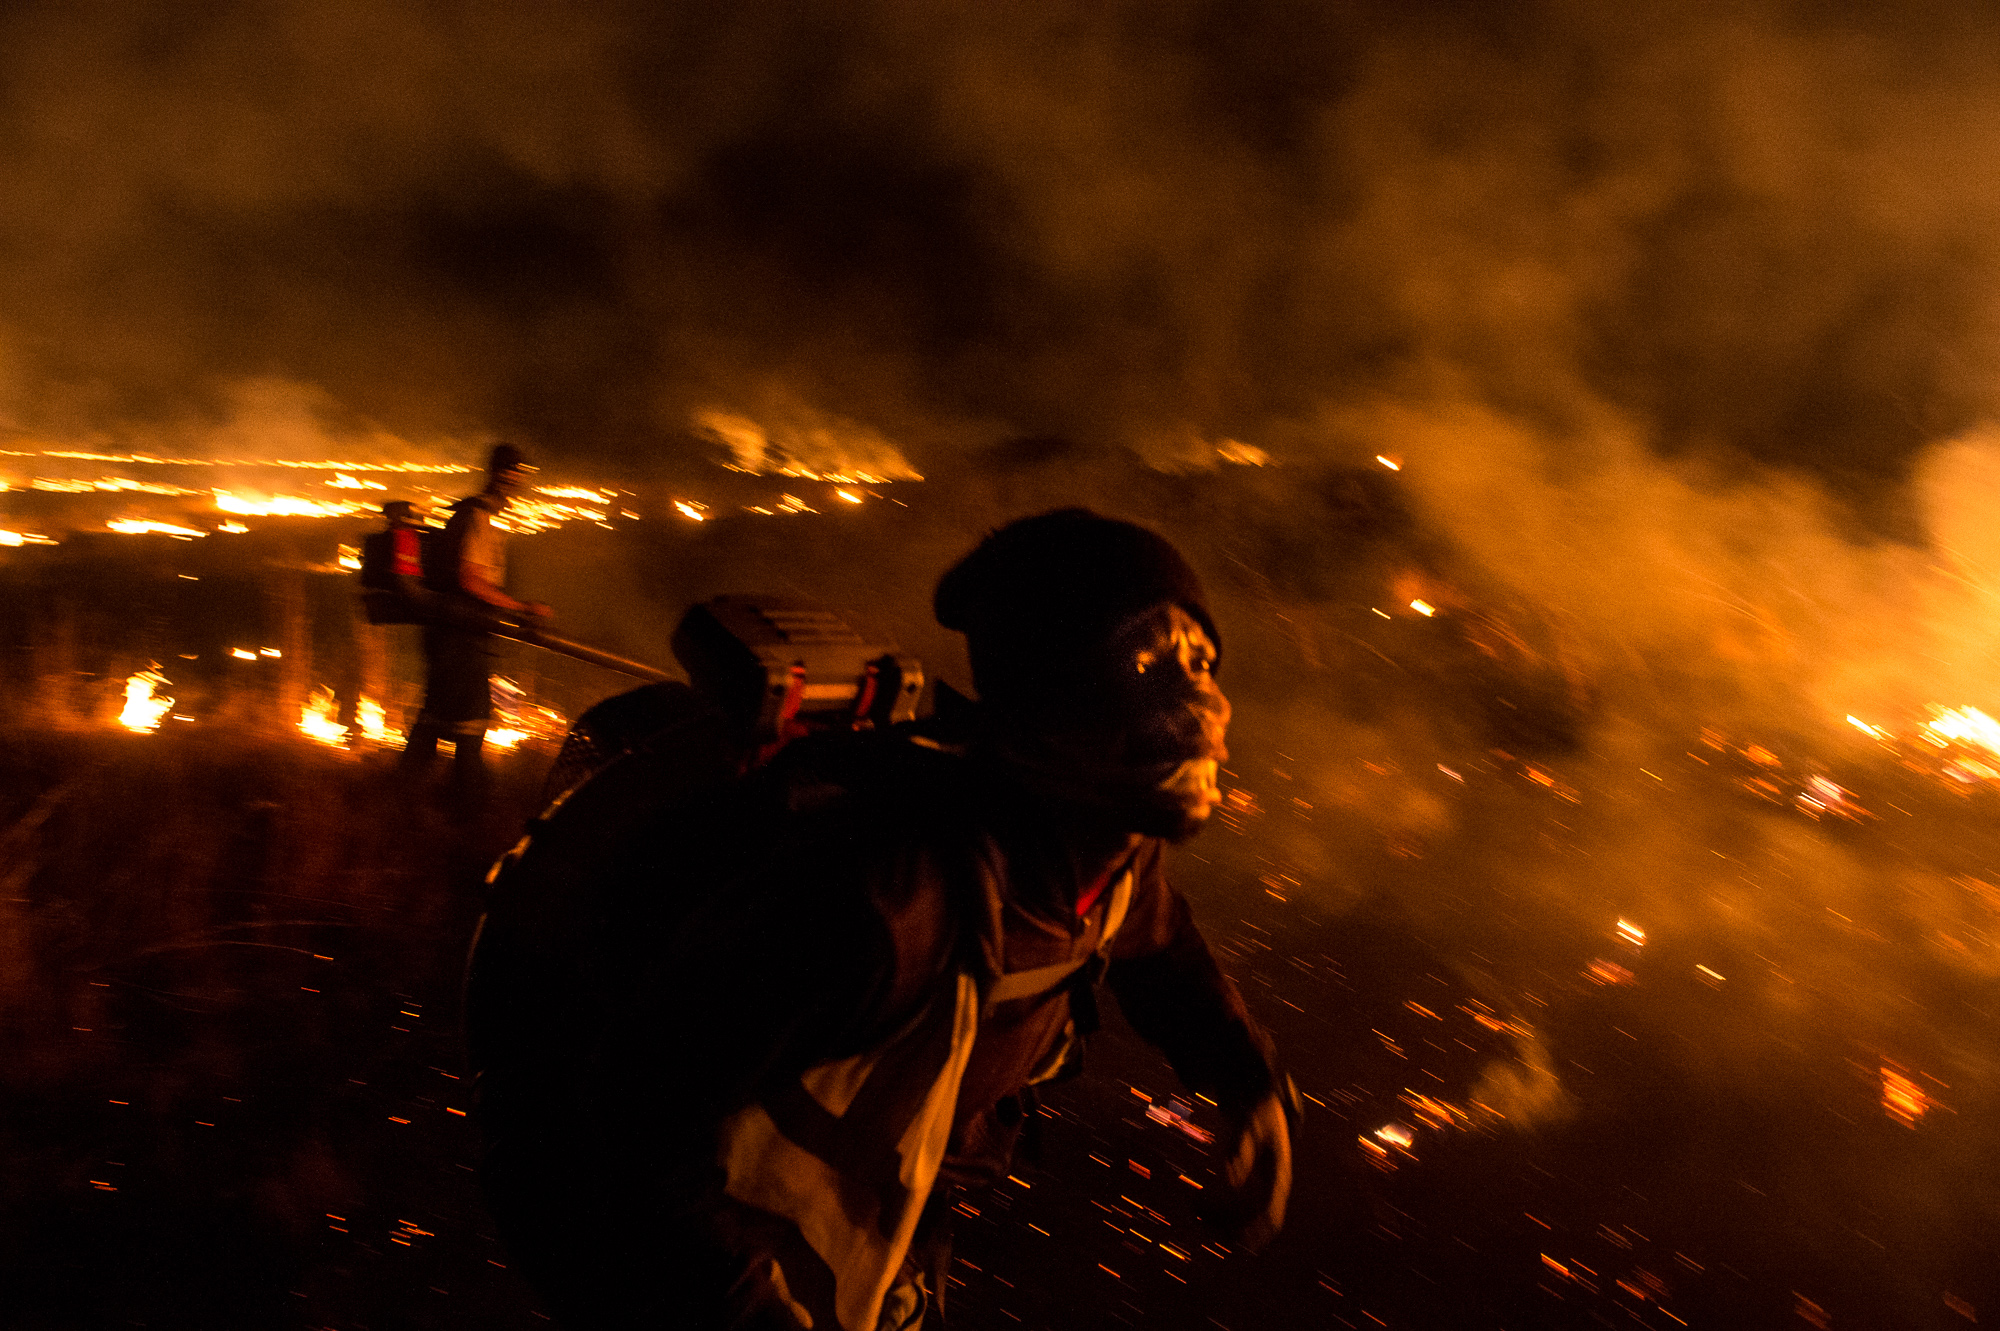  South Africa, Gauteng, 20.07.2018 // Farmers and farmworkers are  fighting  fires on their land. It’s the third  fire this night. They assume the  fires are set.
// Lucas Bäuml 